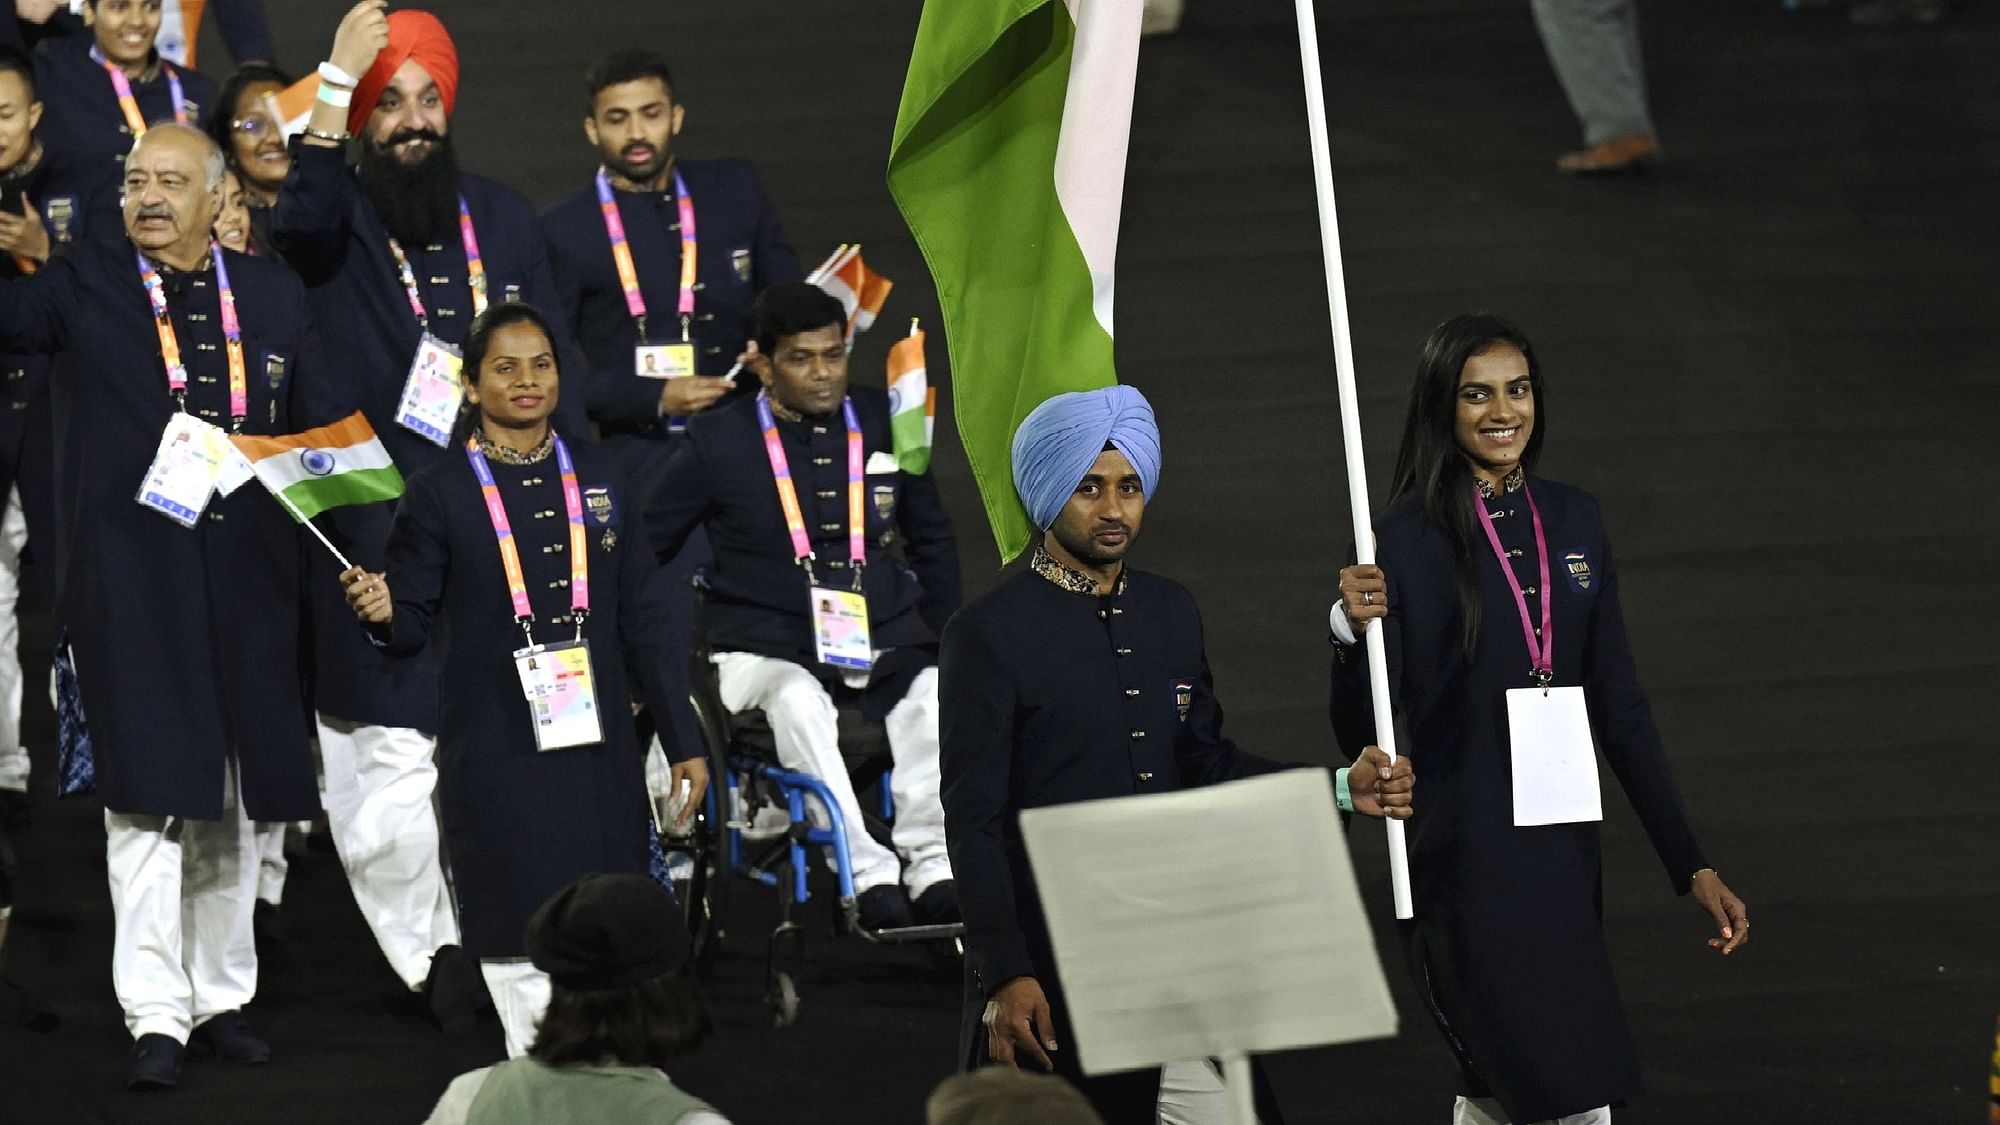 <div class="paragraphs"><p>CWG 2022 got underway with a glittering Opening Ceremony on Thursday night. </p></div>